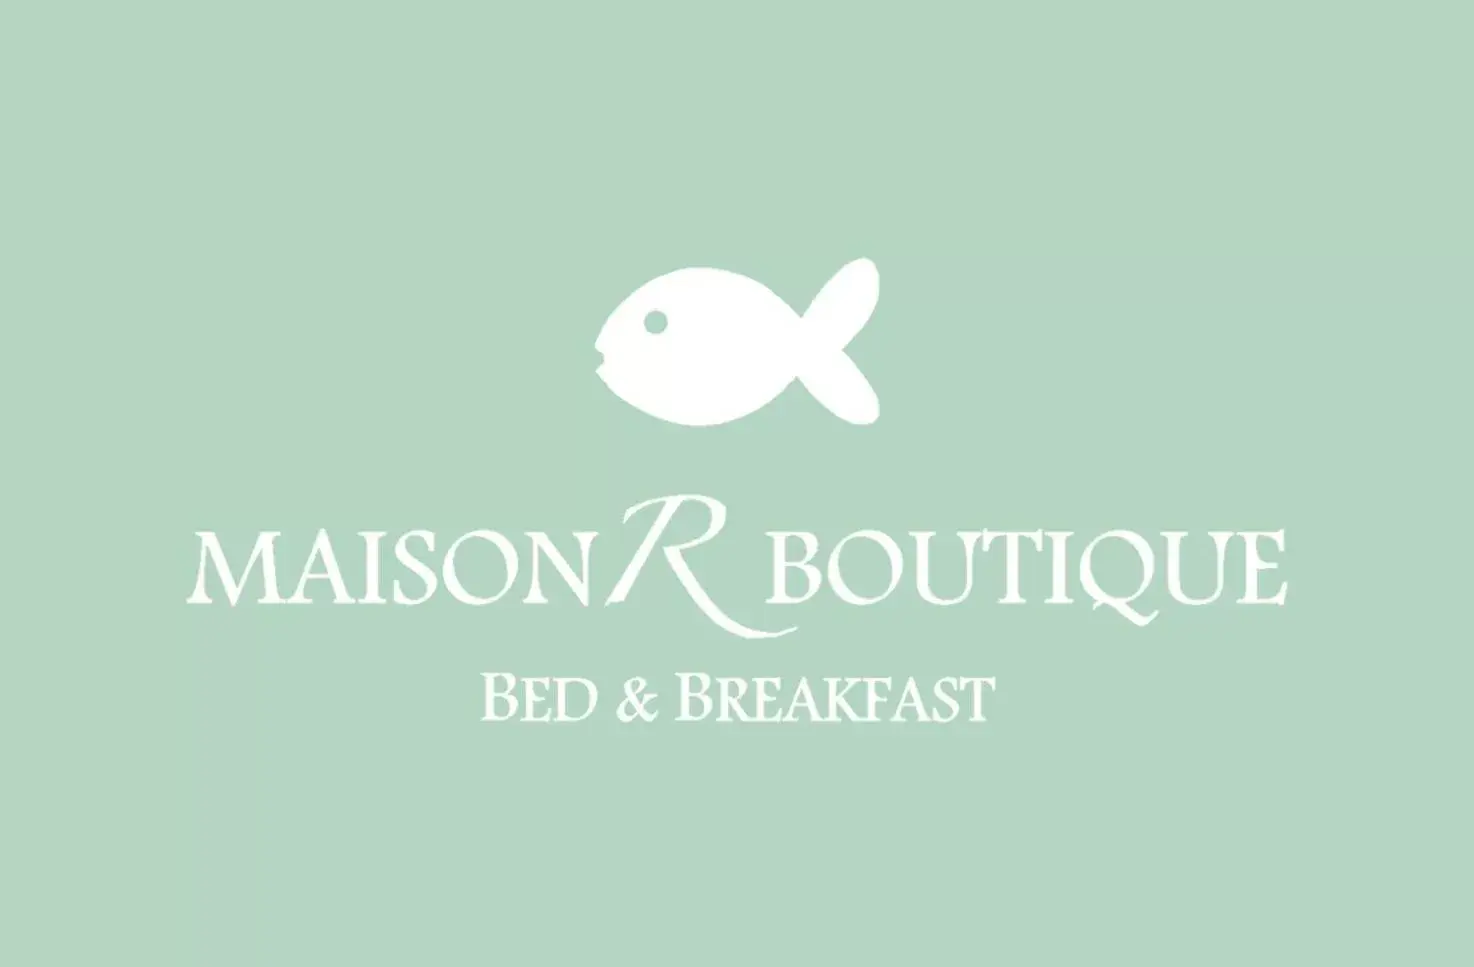 Property logo or sign in Maison R Boutique